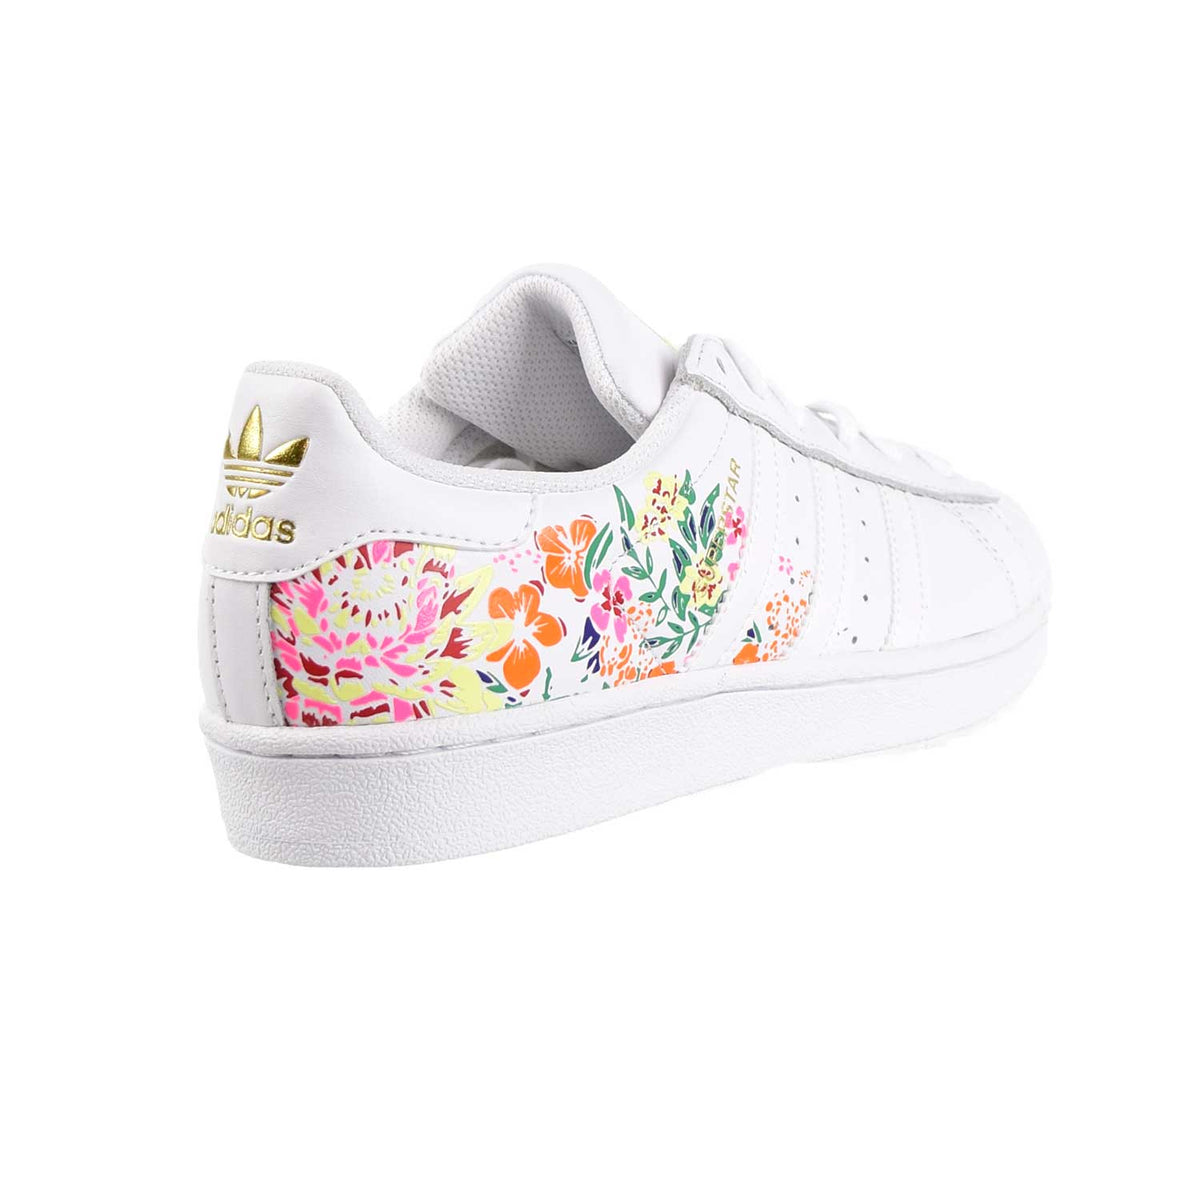 Ananiver Intervenere mælk Adidas Superstar Womens Shoes Floral Footwear White/Gold Metallic – Sports  Plaza NY